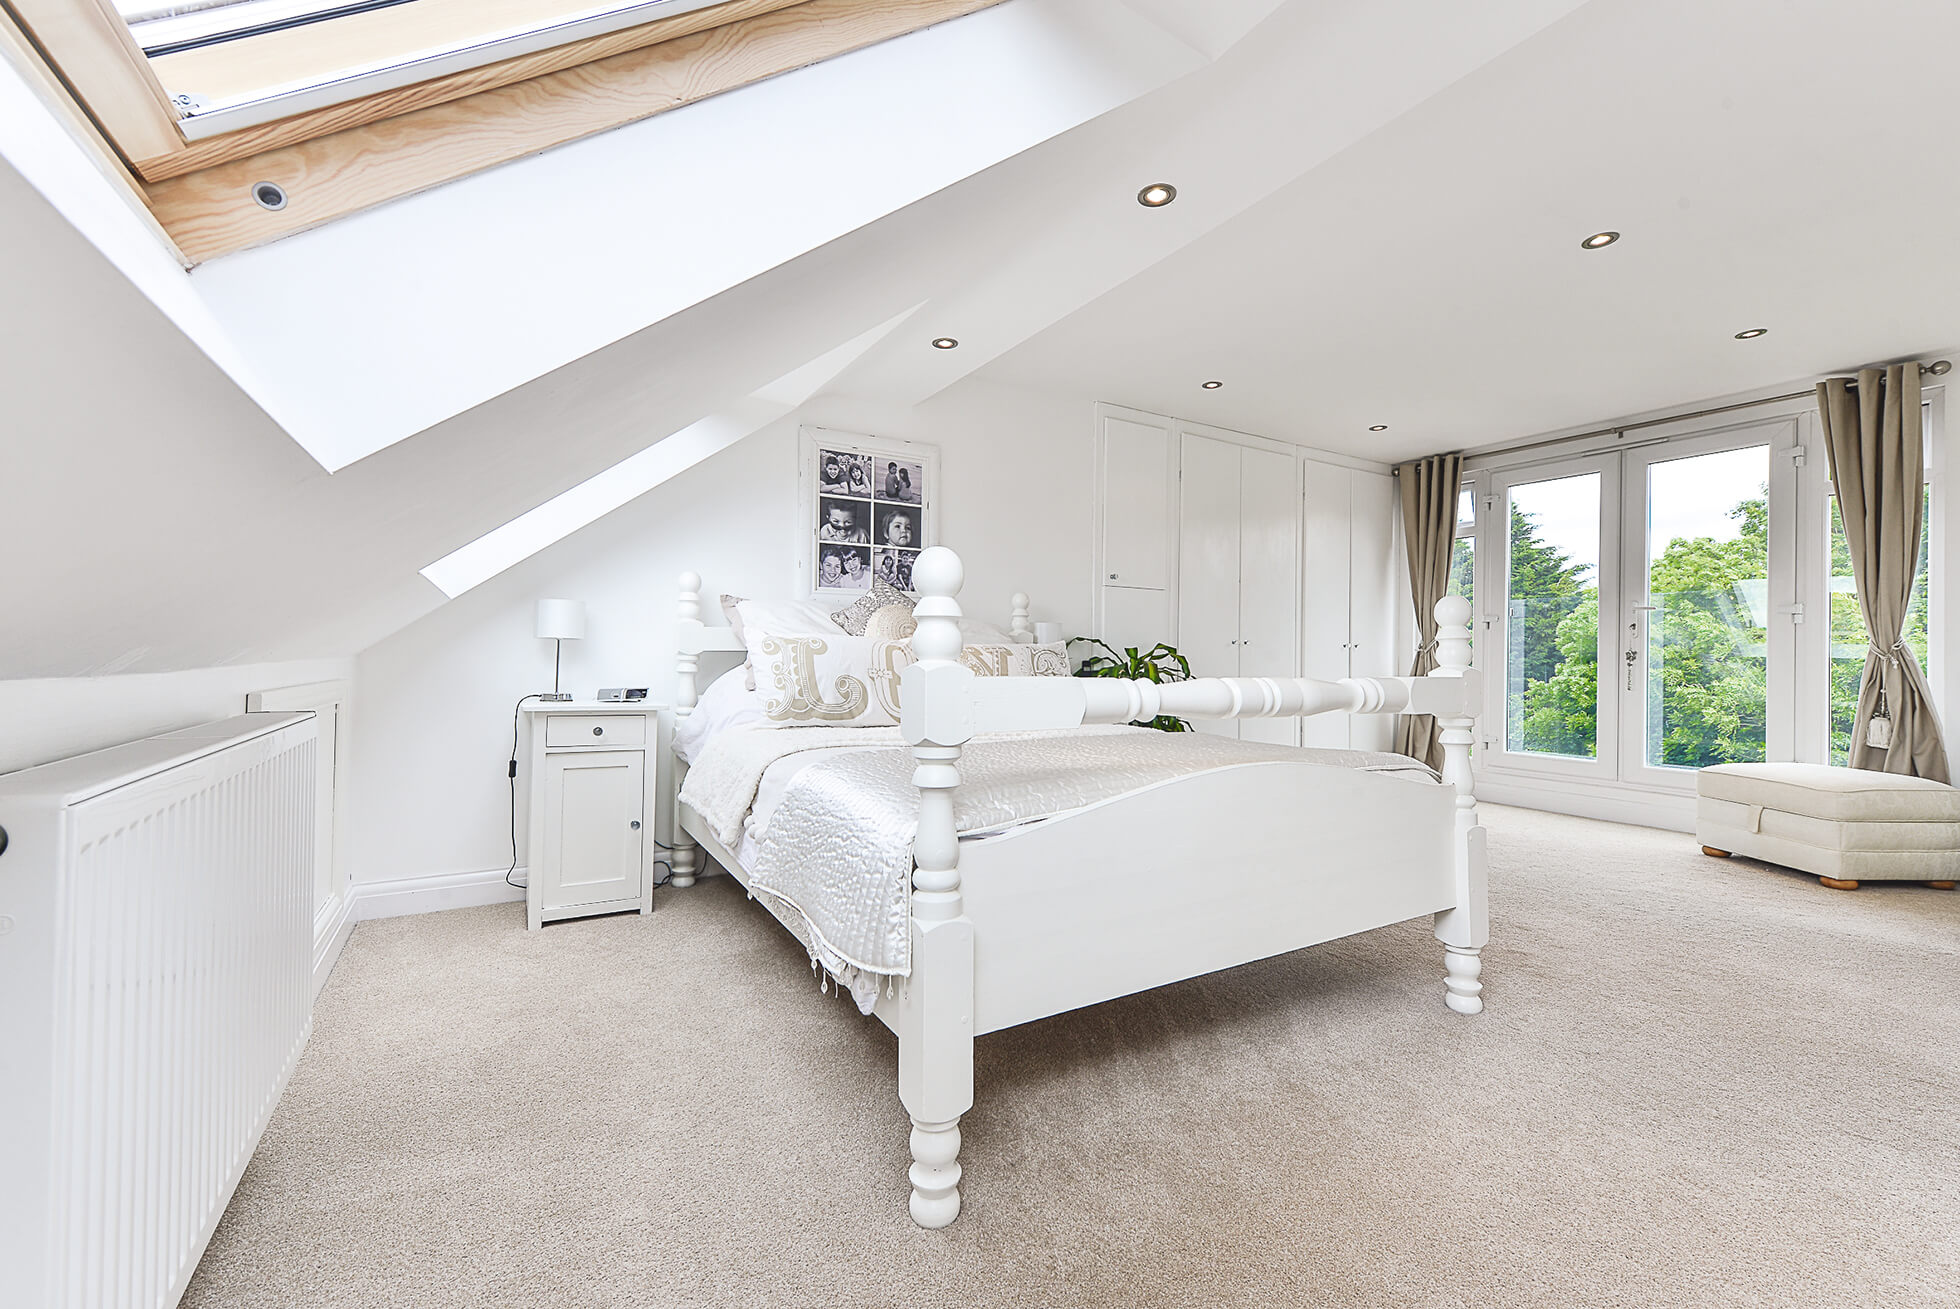 Do you have a question about converting your Loft in Puttenham? Here are the most popular questions asked by our clients.